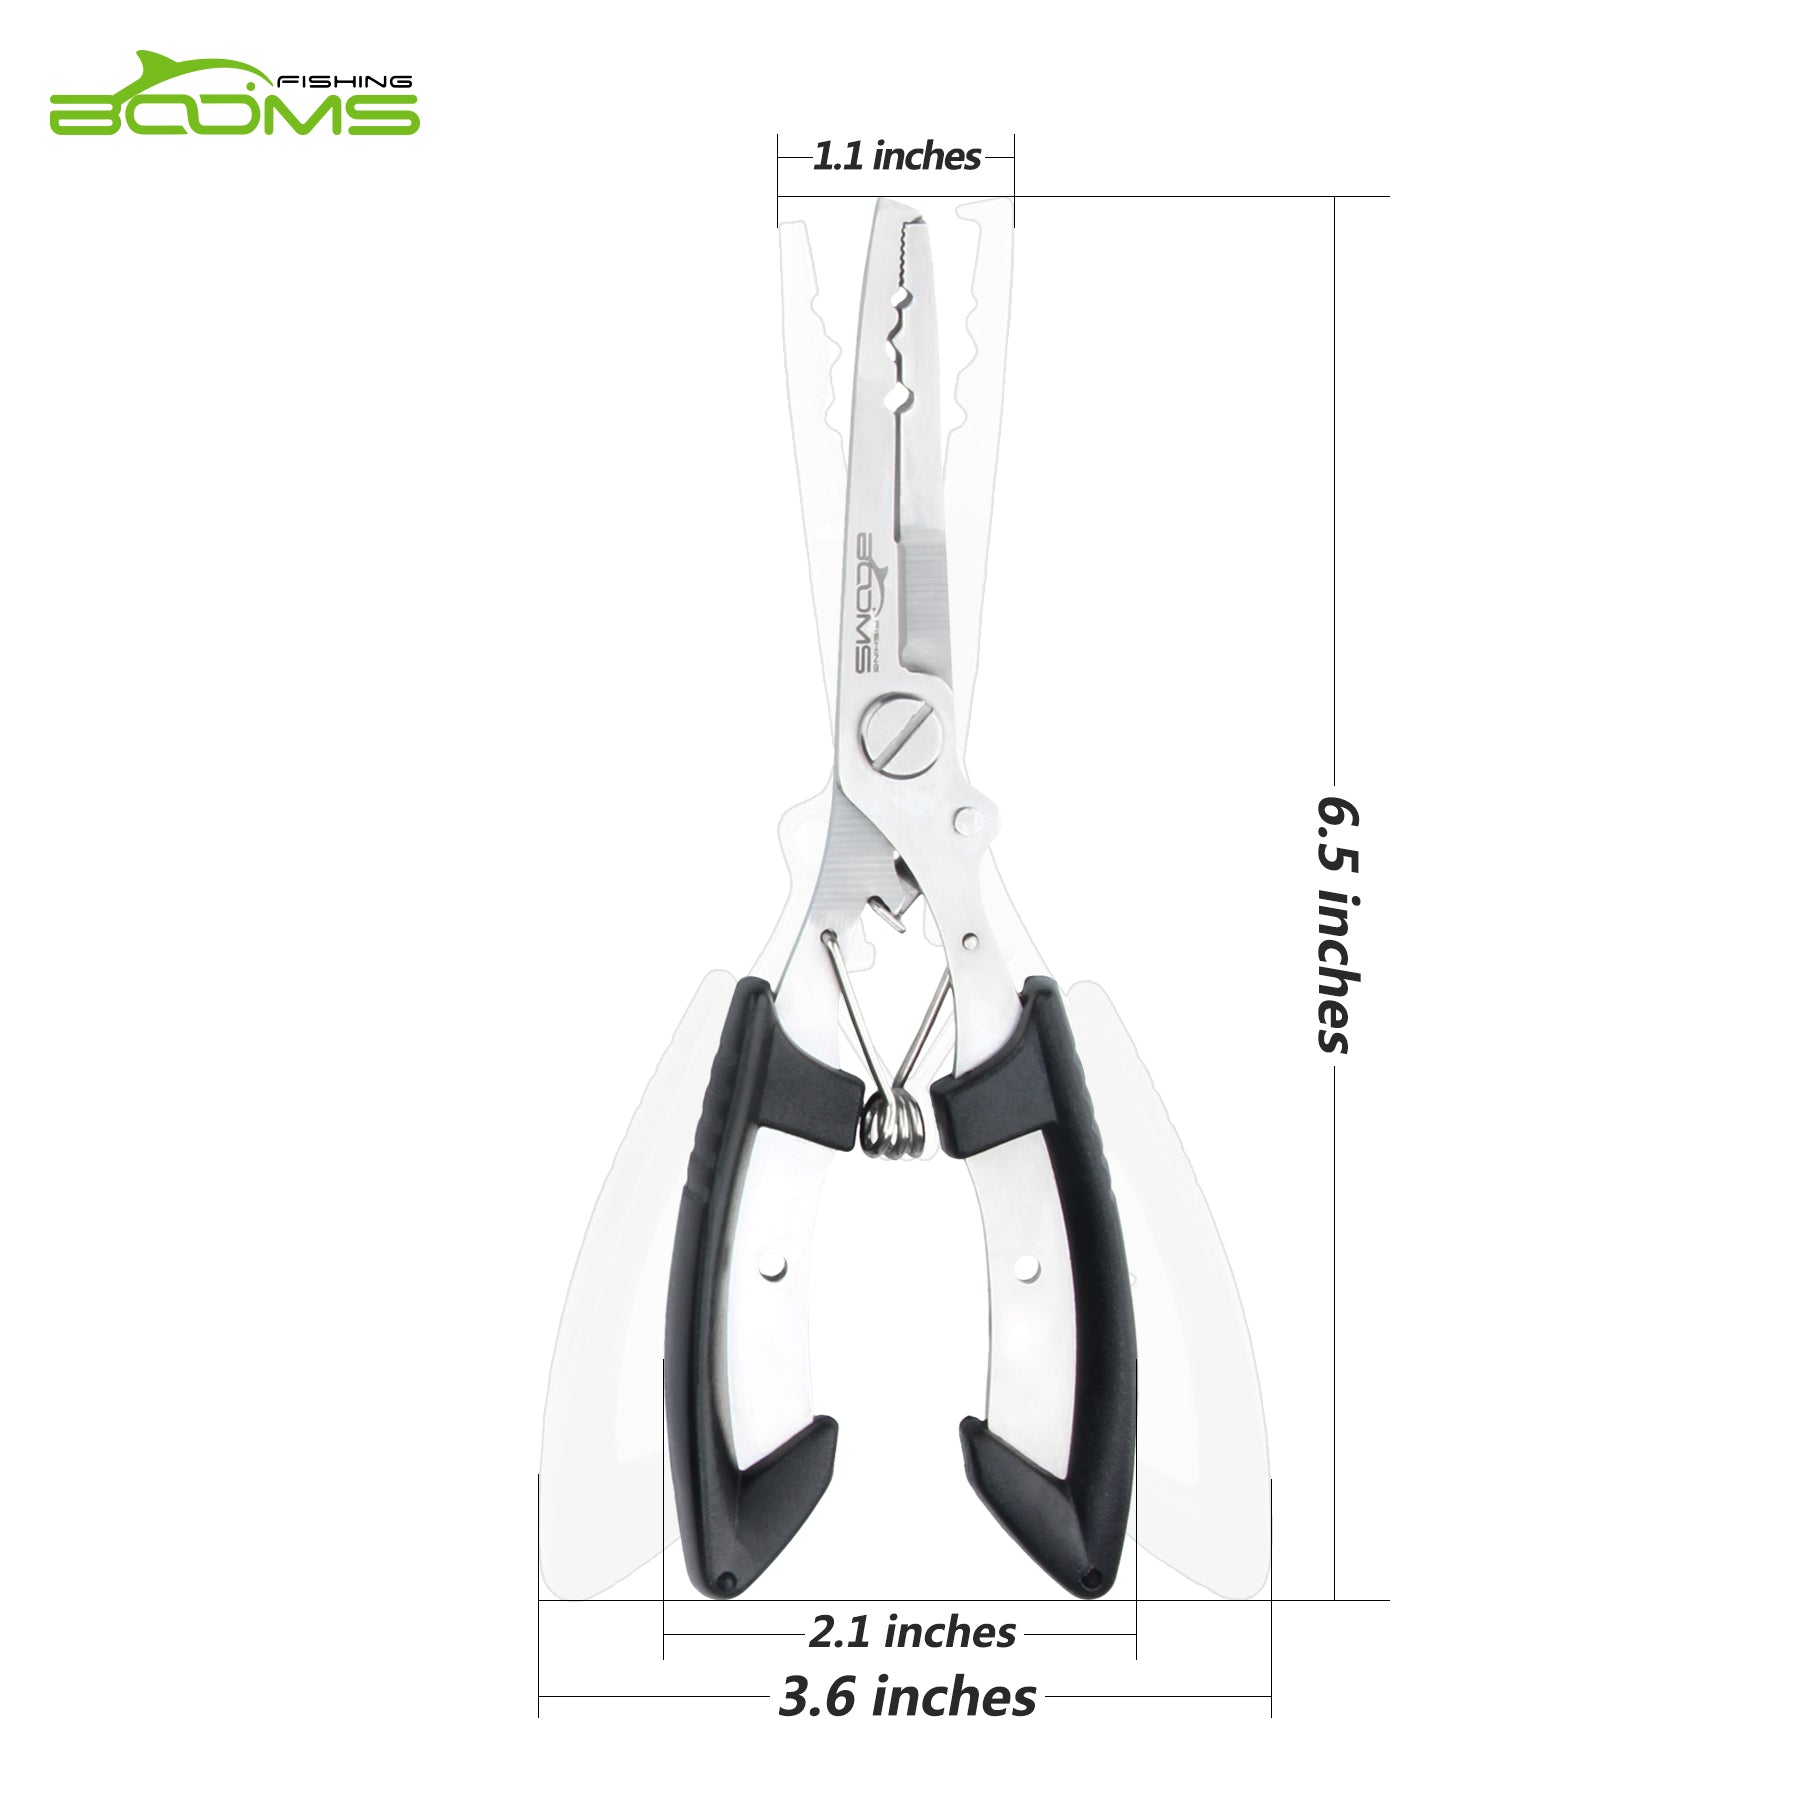 H01 Fishing Pliers Fish Grip Tool Set – Booms Fishing Official